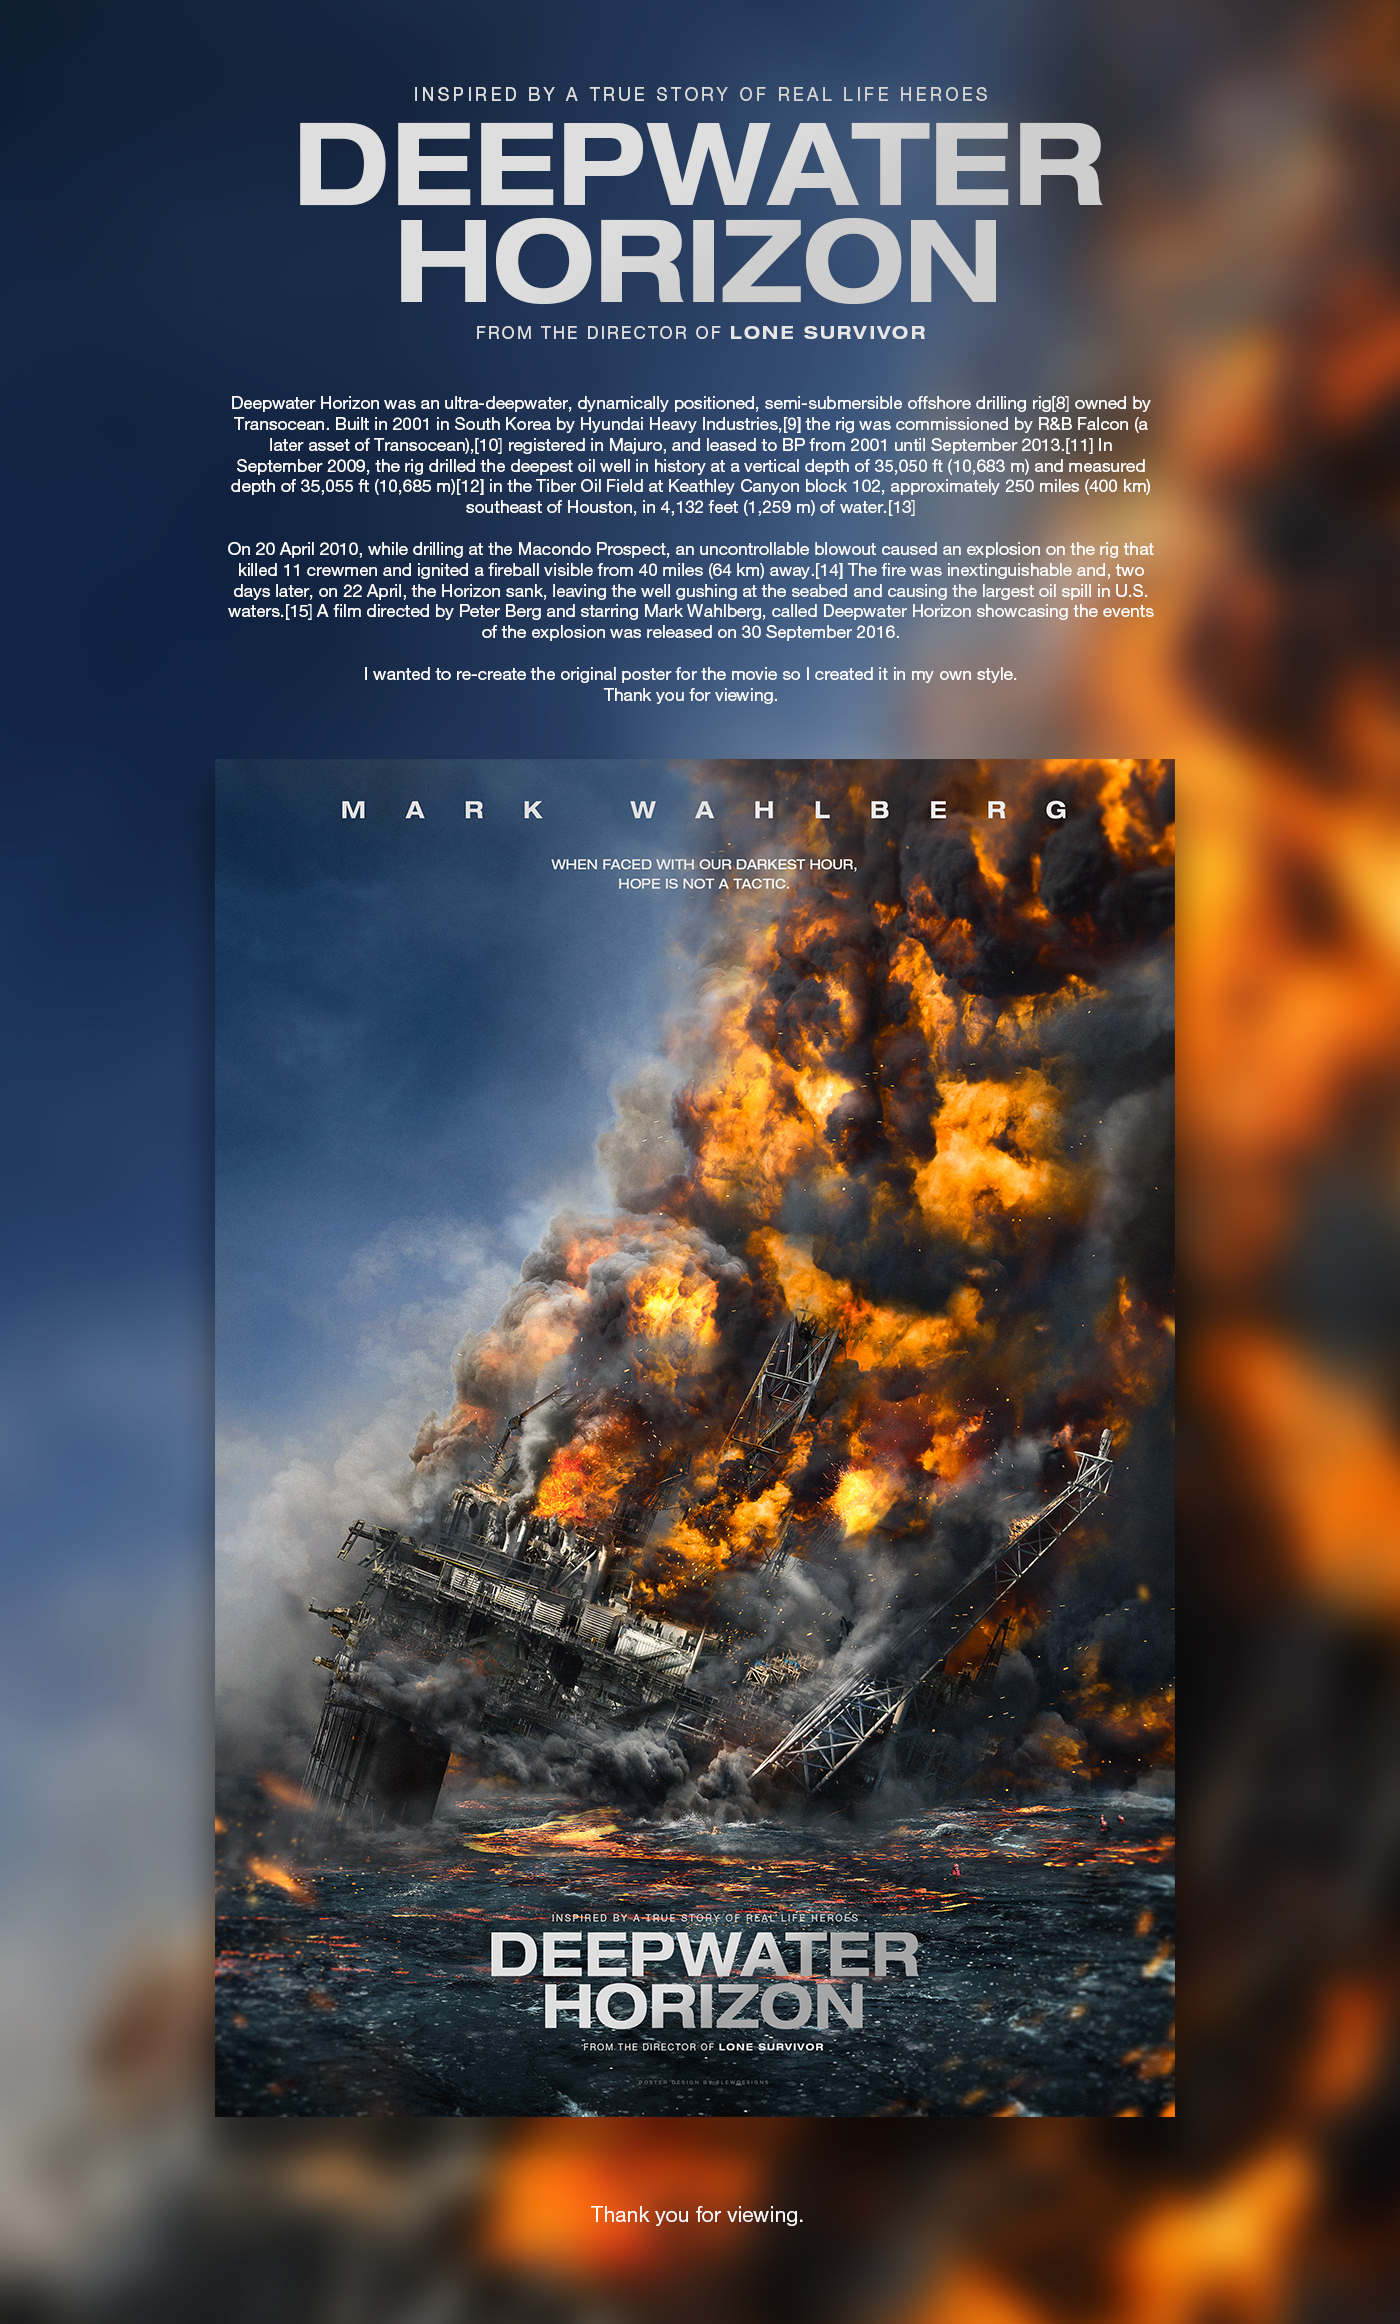 Deepwater Horizon Mark Wahlberg movie poster Poster Image film compositing composite image